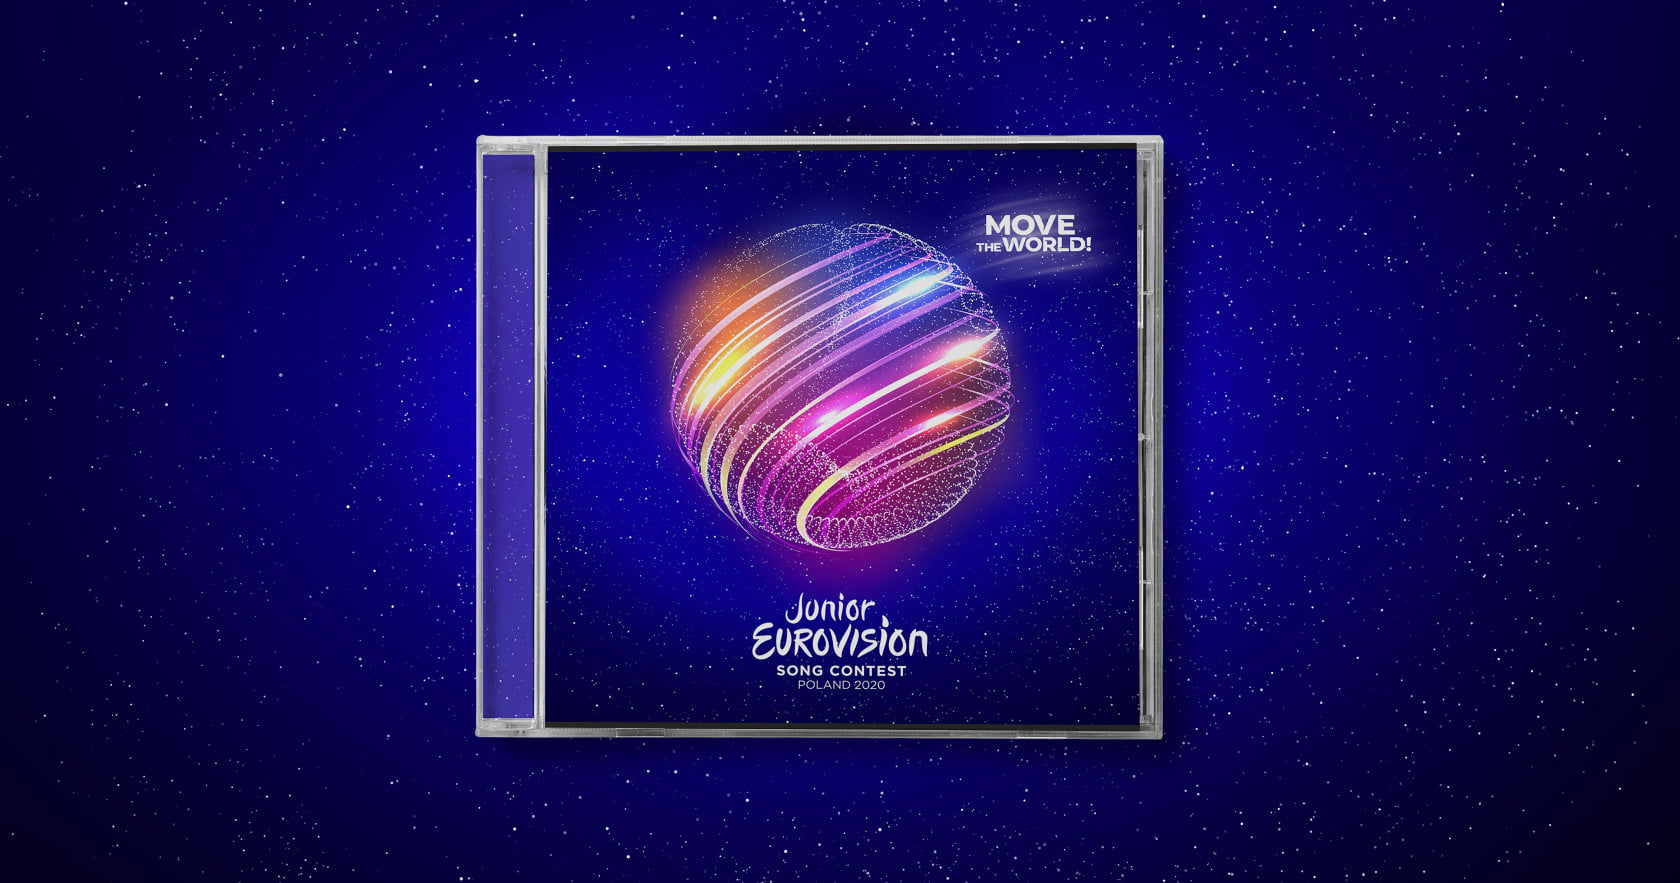 Physical CD of Junior Eurovision album will be released after 8 years